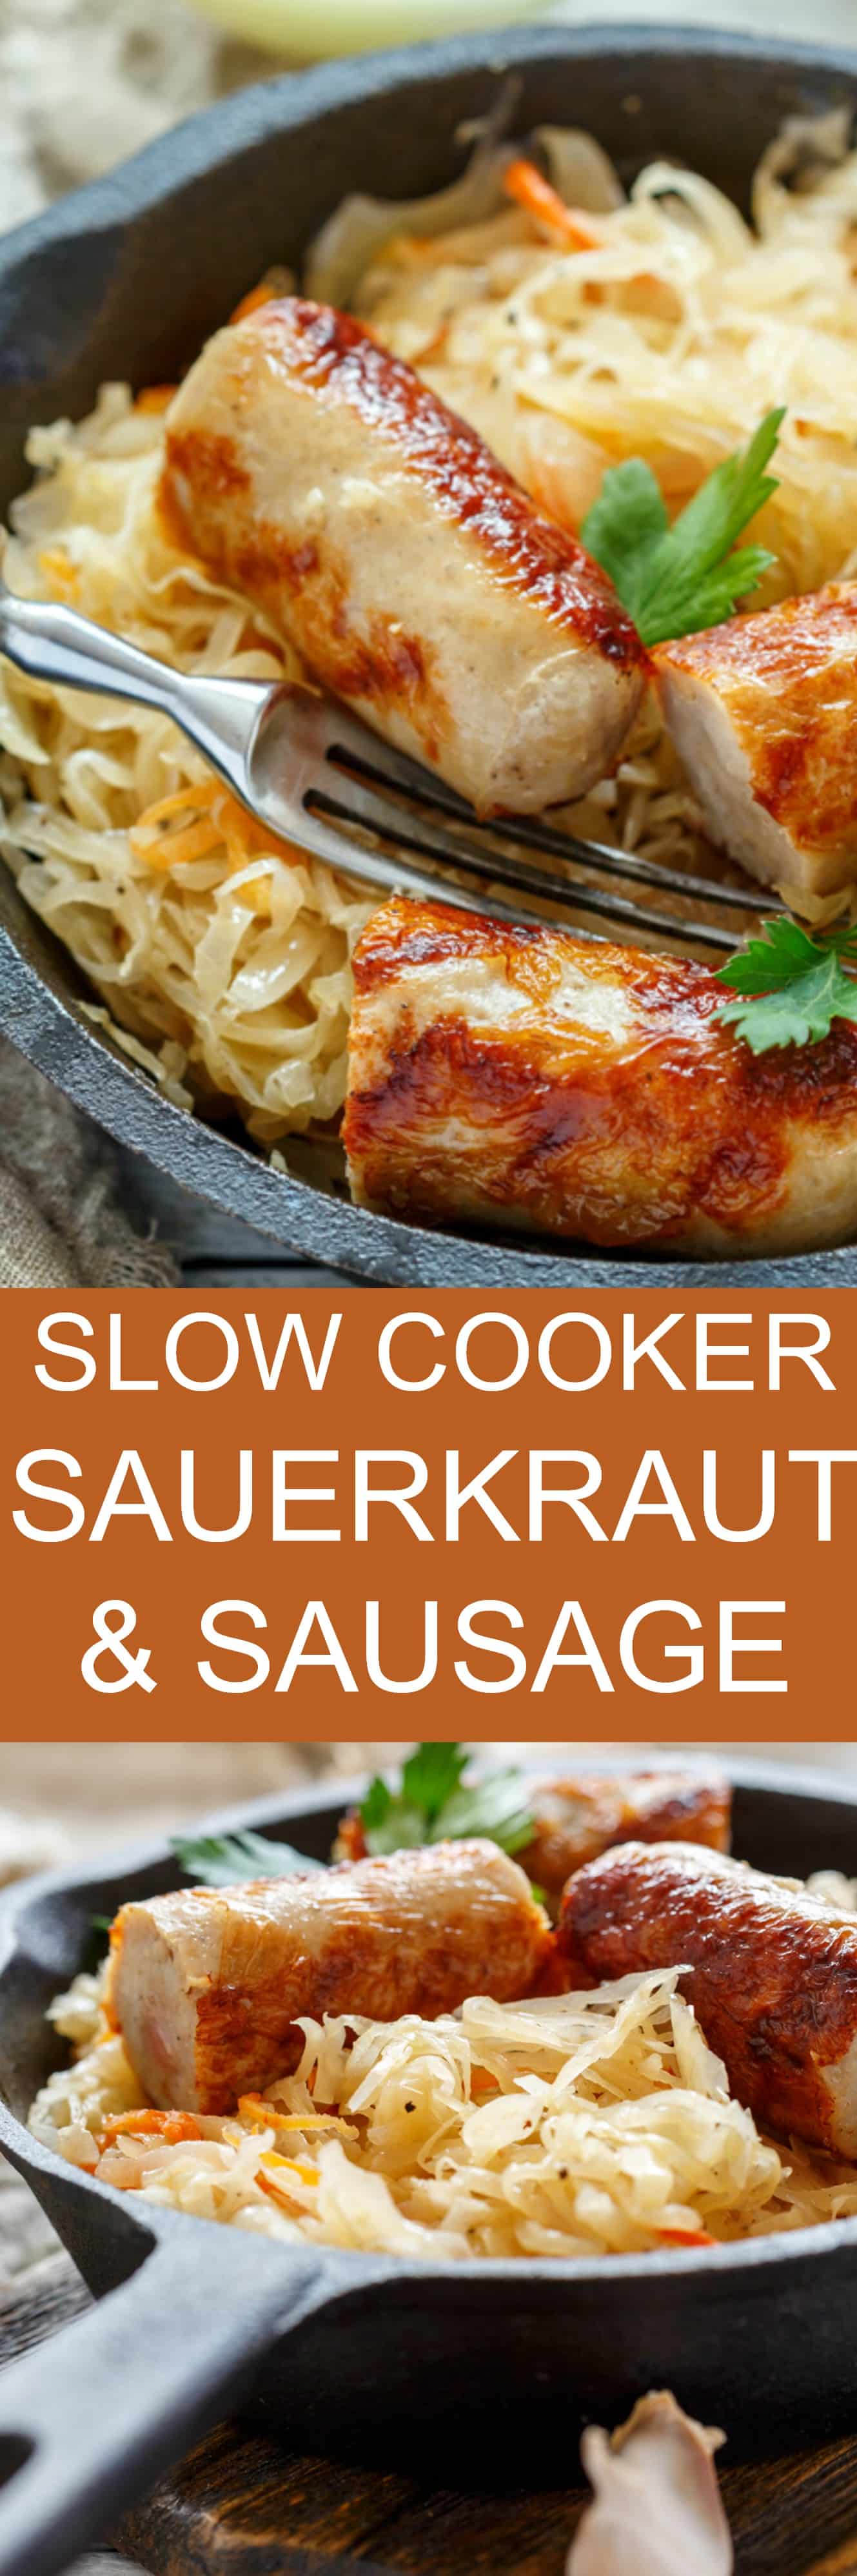 FAMILY FAVORITE Slow Cooker Sausage and Sauerkraut served over mashed potatoes! This easy crockpot meal will become your family's new favorite dinner! Use a good pork kielbasa for full flavor! It's inspired by my Polish family!